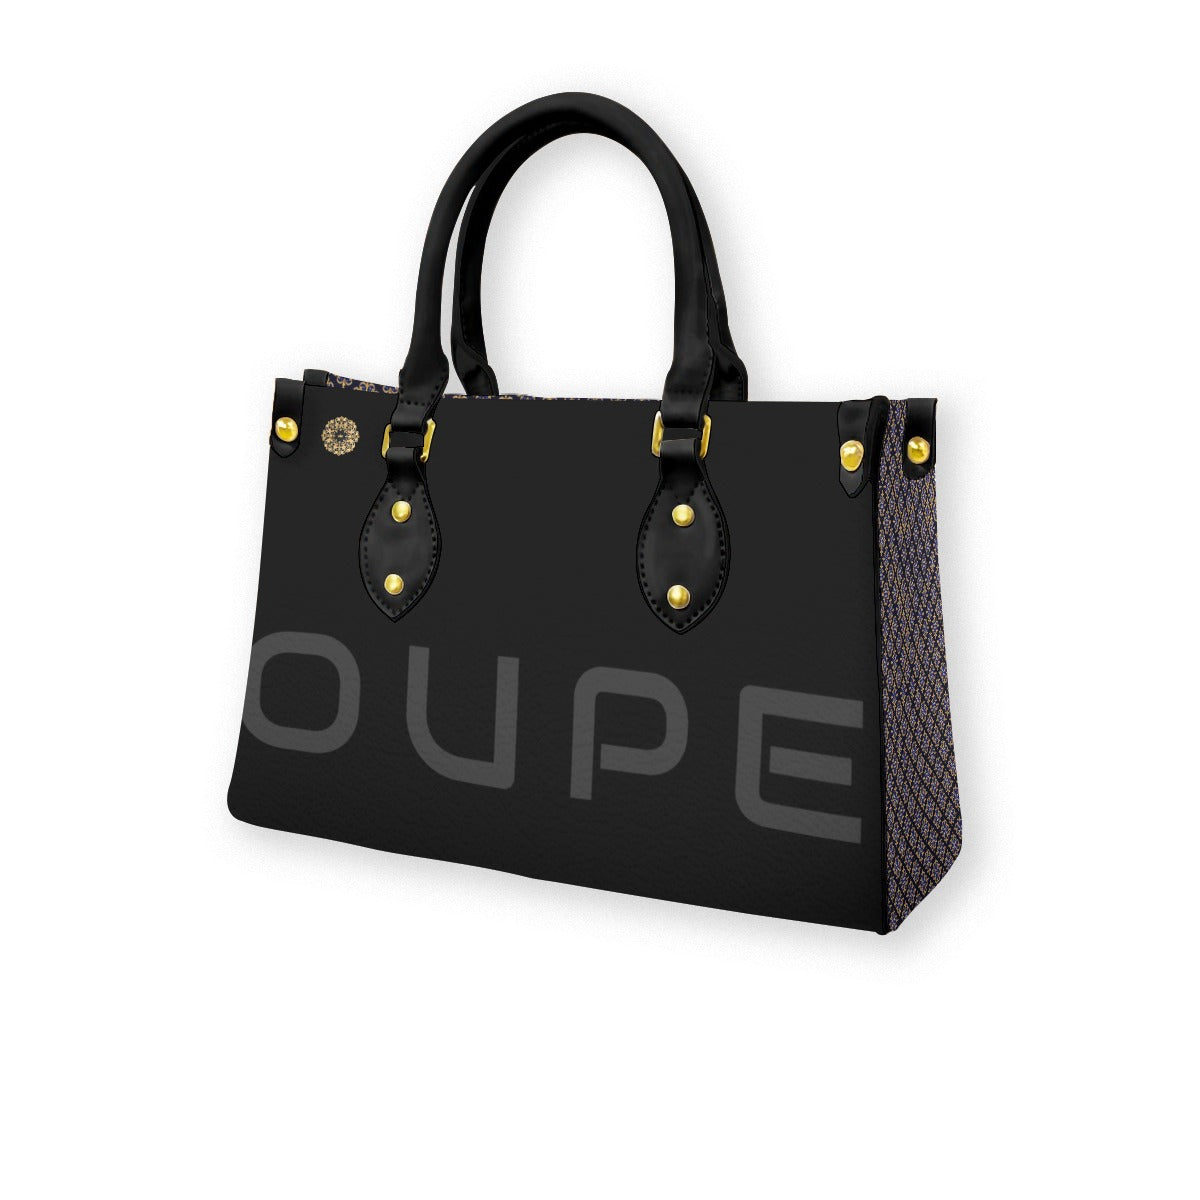 Women's "OUPE"  (Lemon) Tote Bag With Black Handle